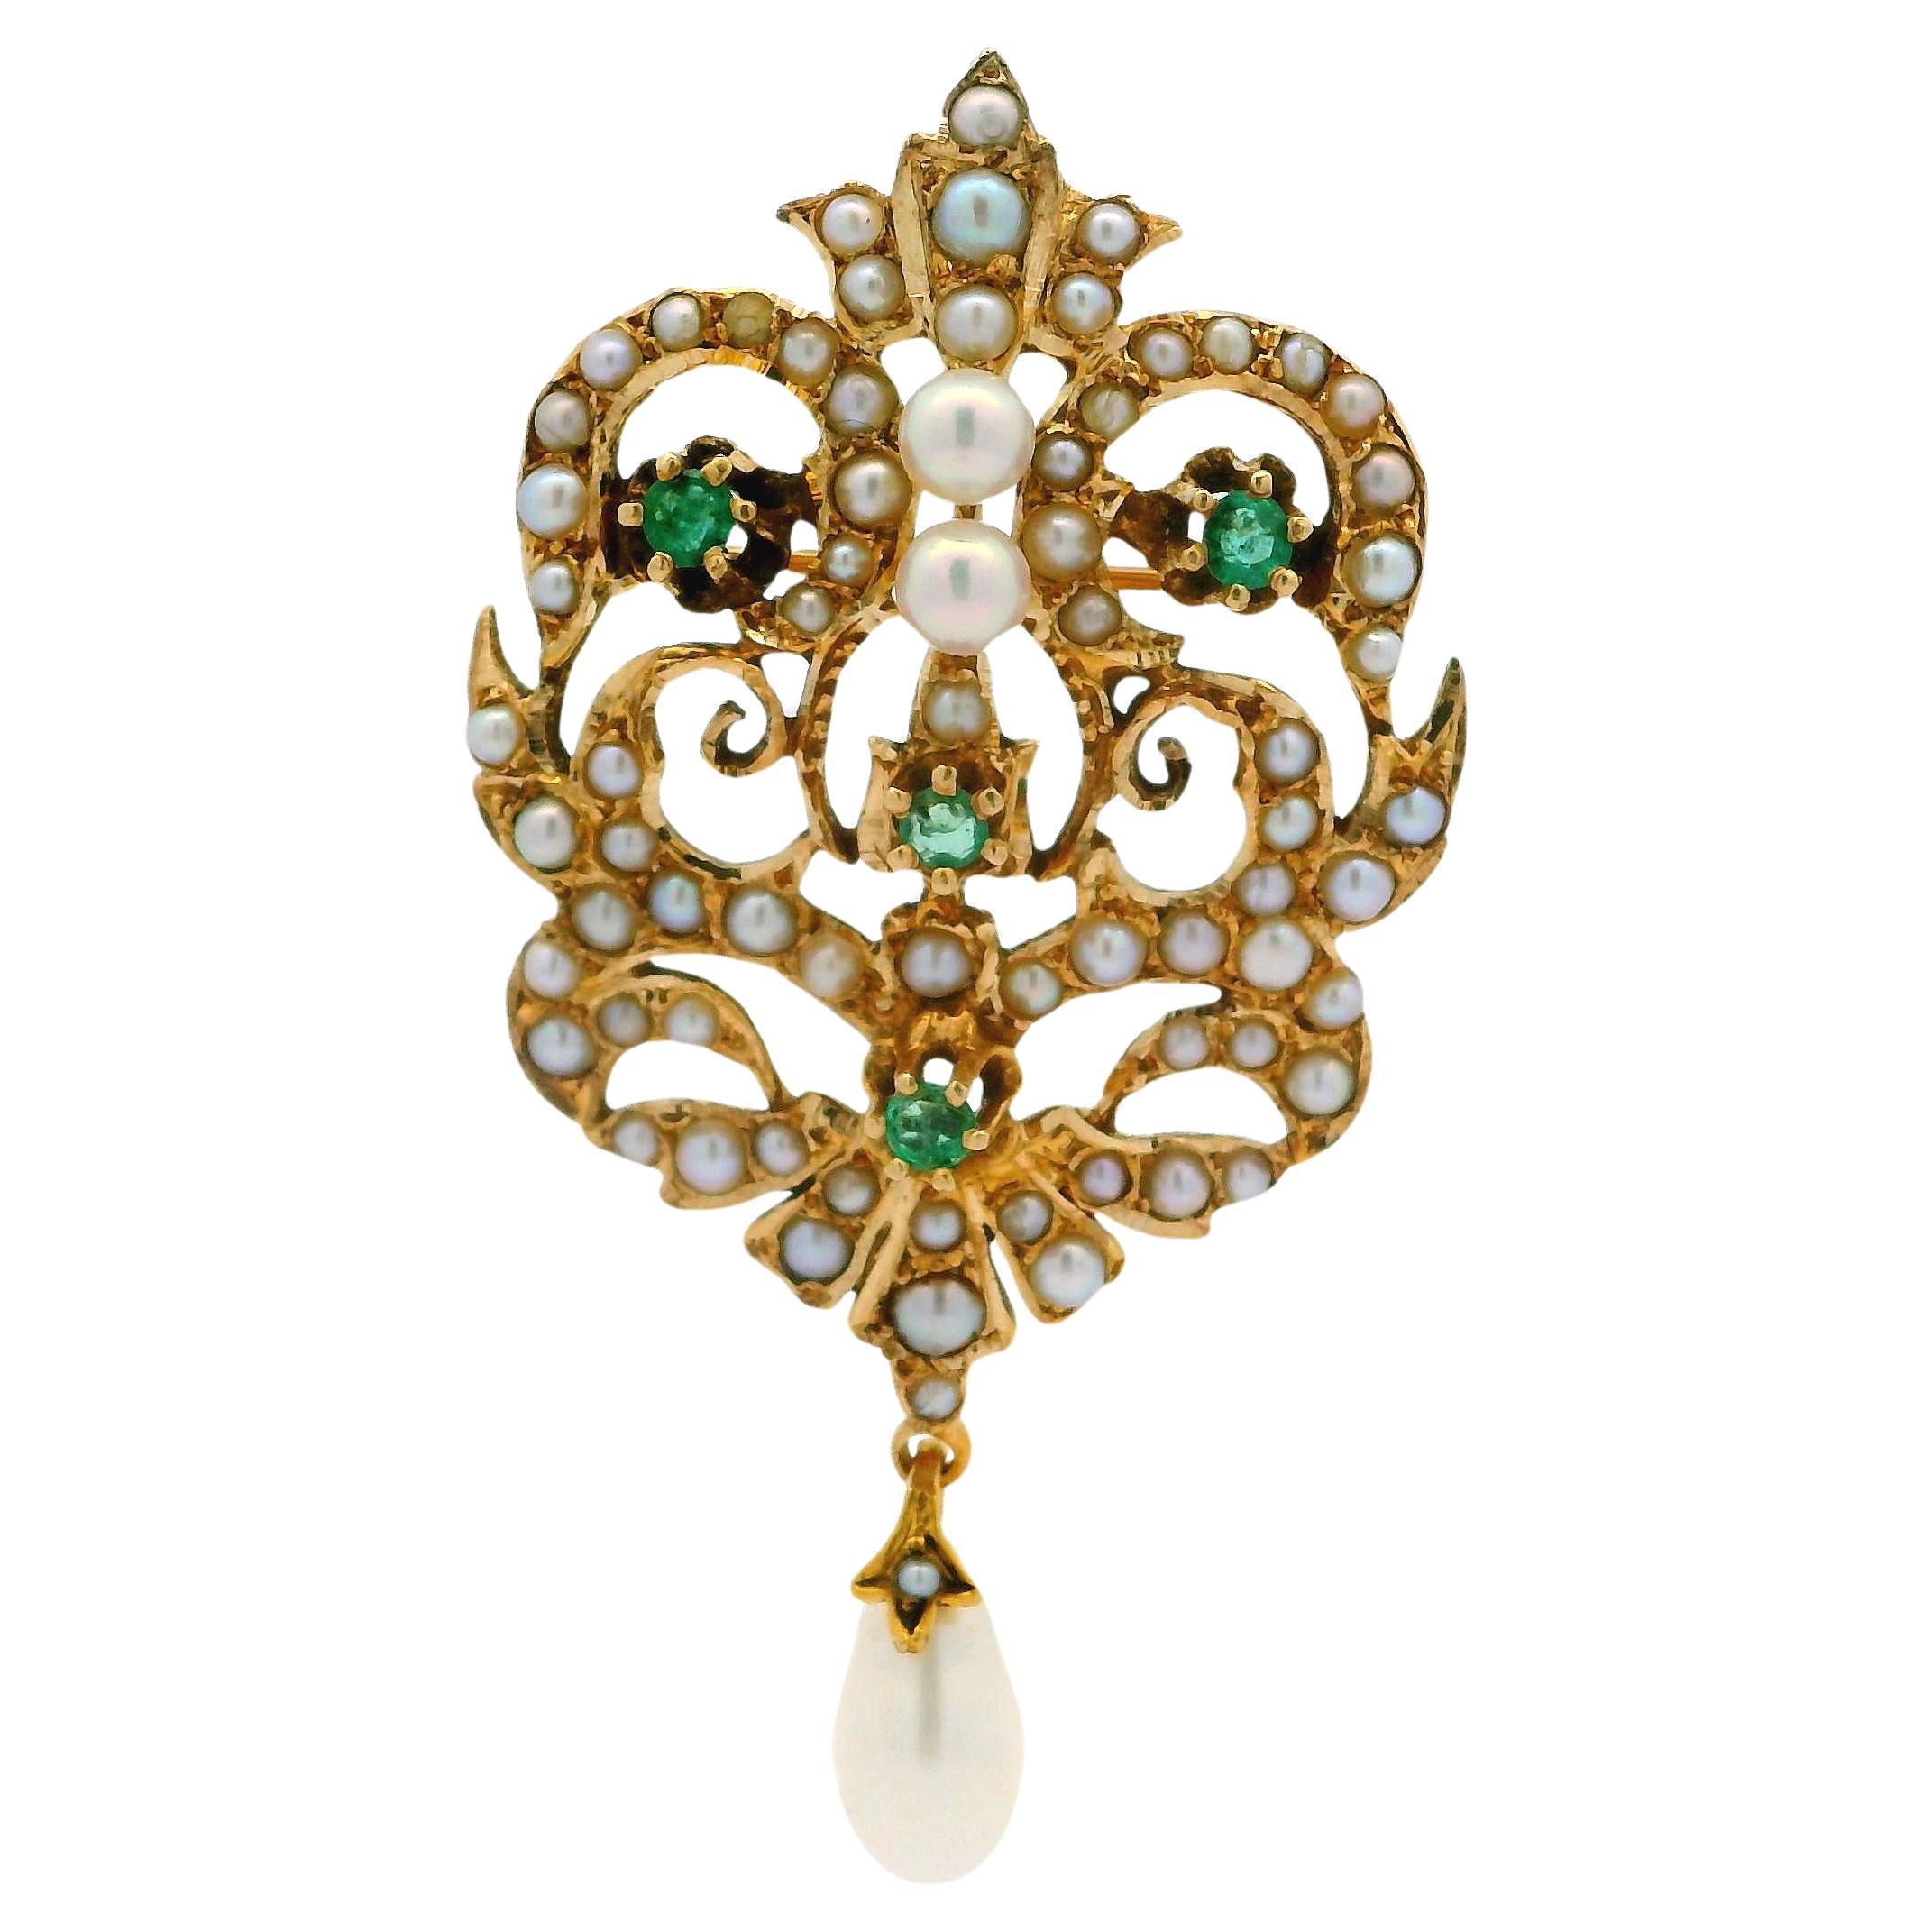 Vintage Victorian Revival 14k Yellow Gold Emerald Seed Pearl Pin Brooch Pendant